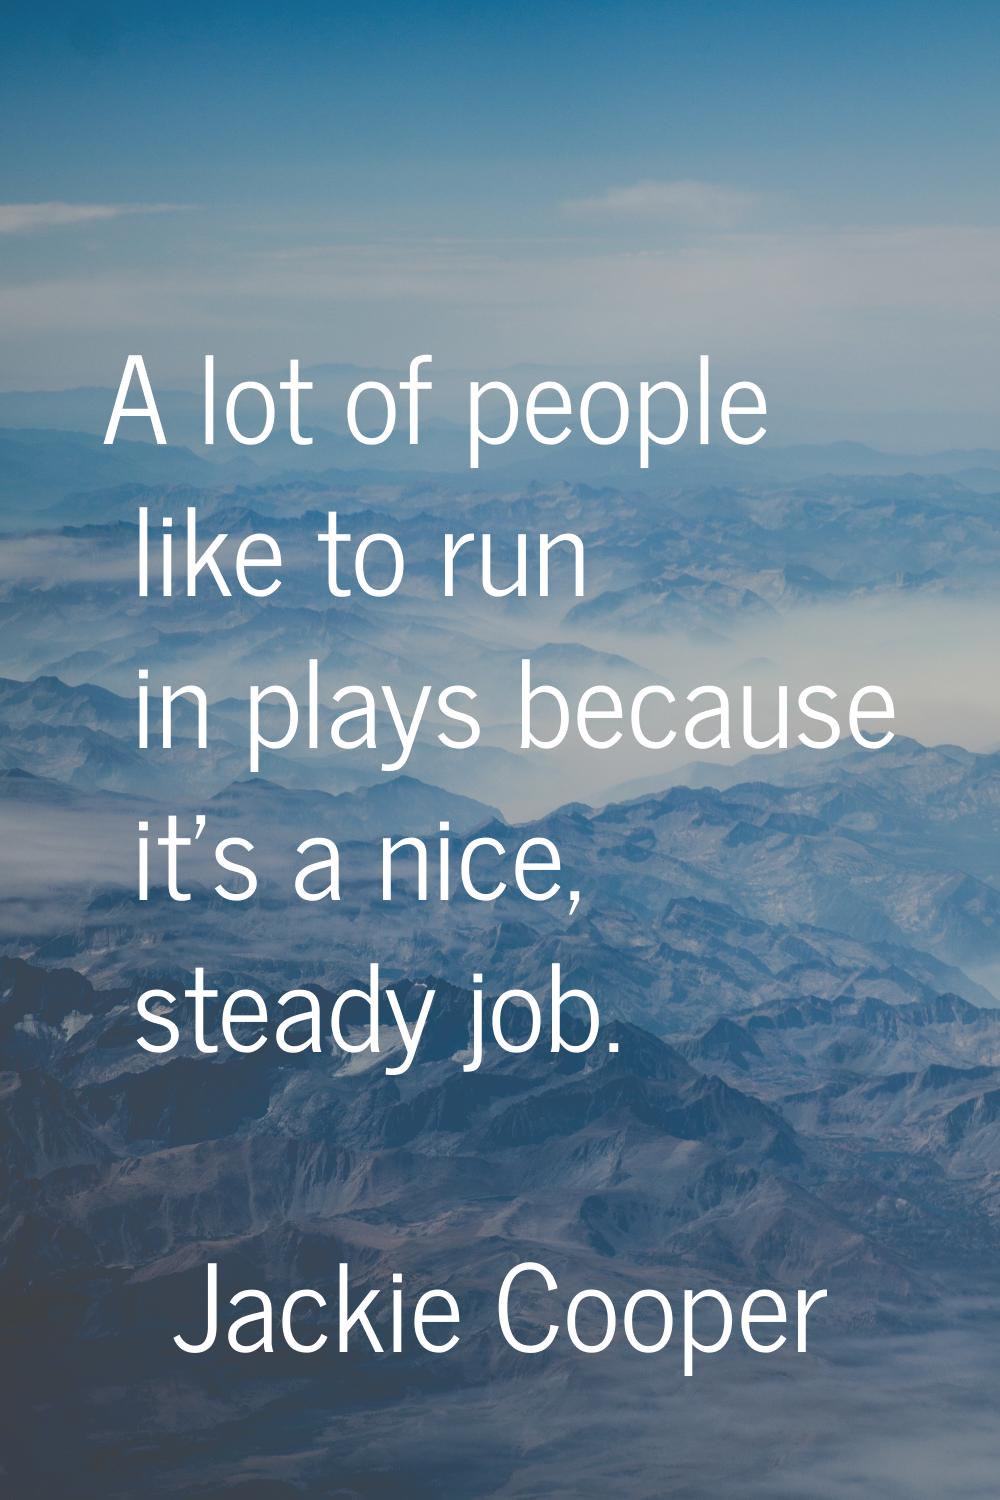 A lot of people like to run in plays because it's a nice, steady job.